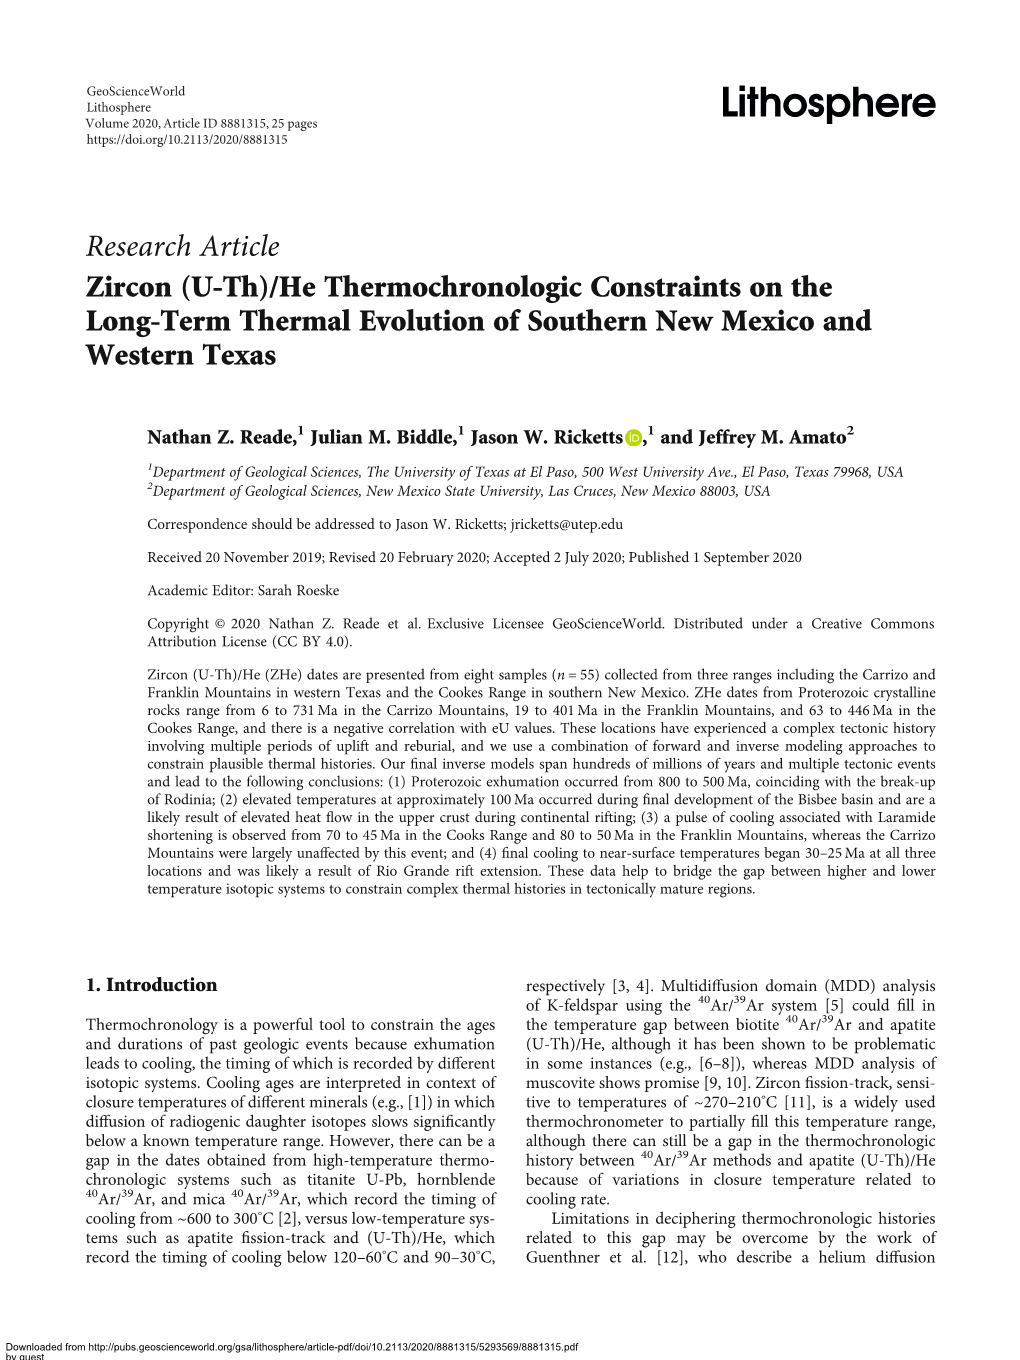 Research Article Zircon (U-Th)/He Thermochronologic Constraints on the Long-Term Thermal Evolution of Southern New Mexico and Western Texas